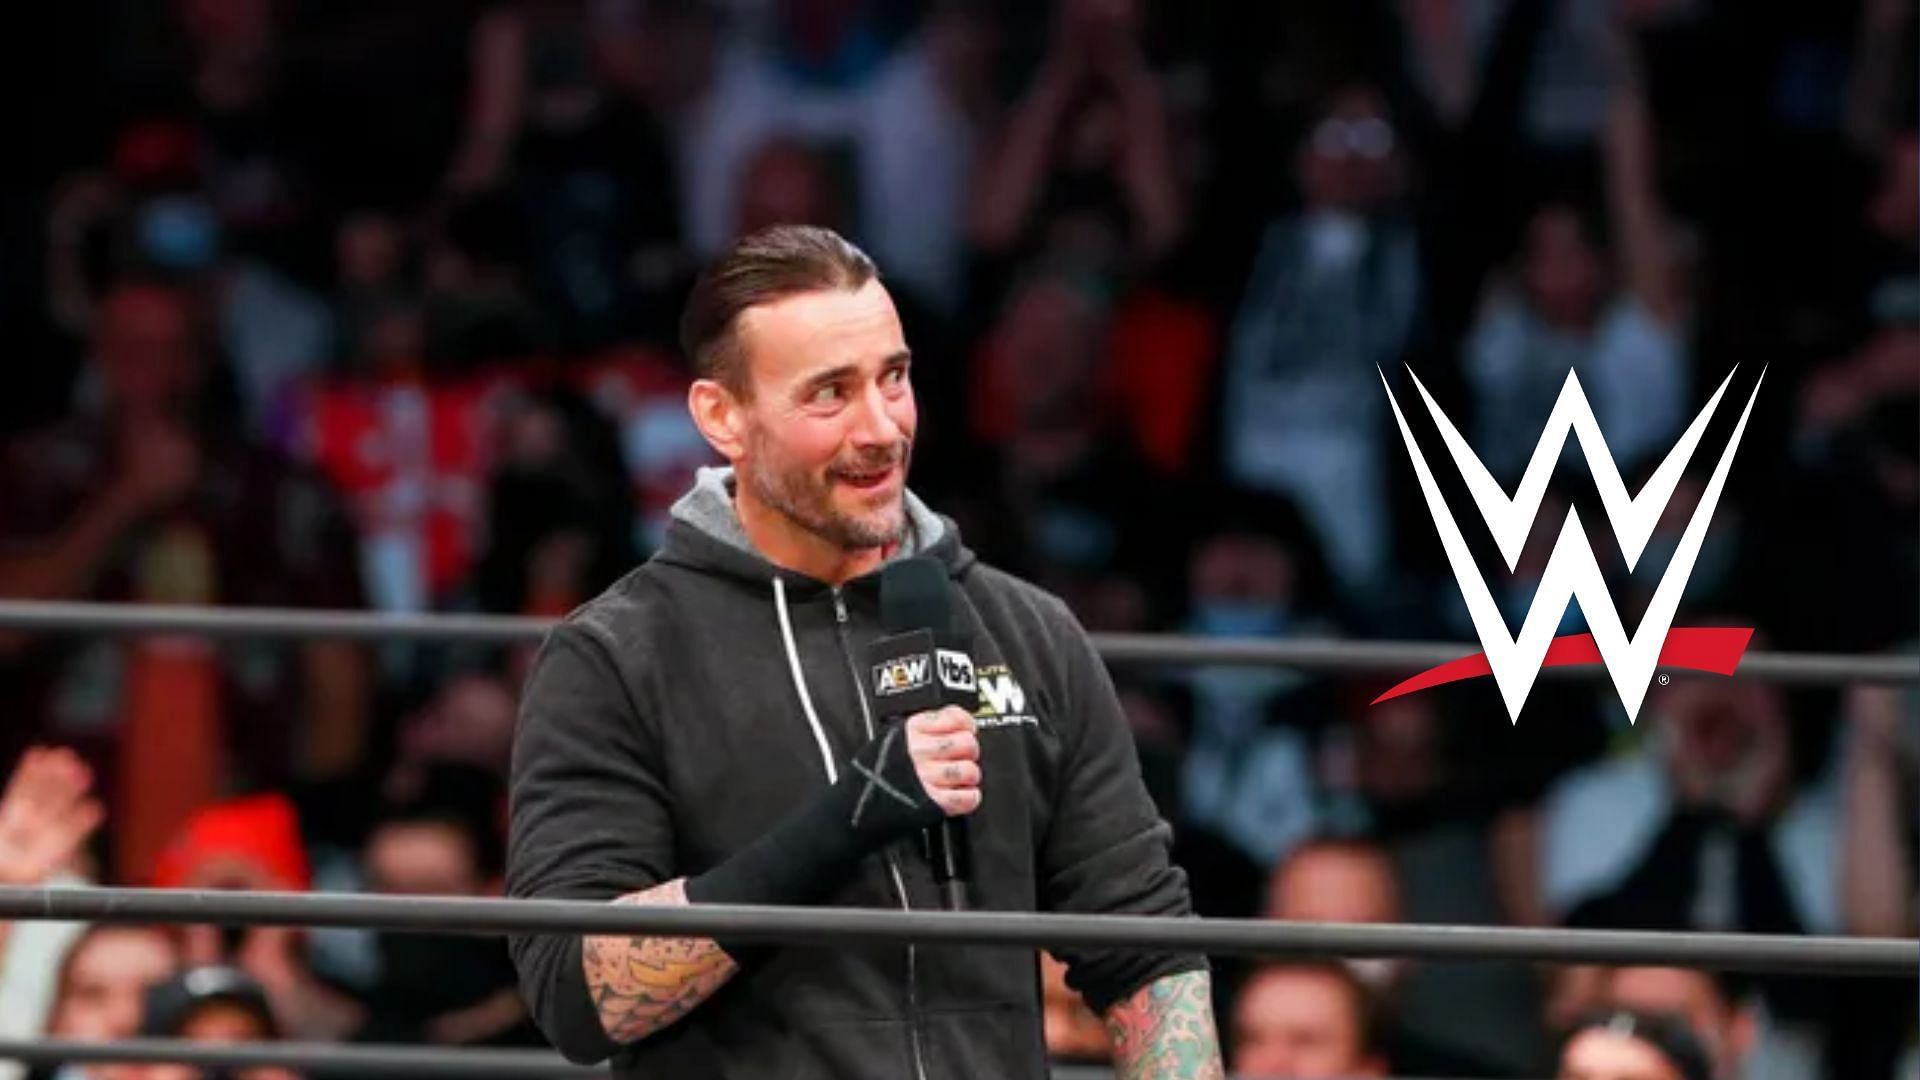 CM Punk was recently fired from AEW